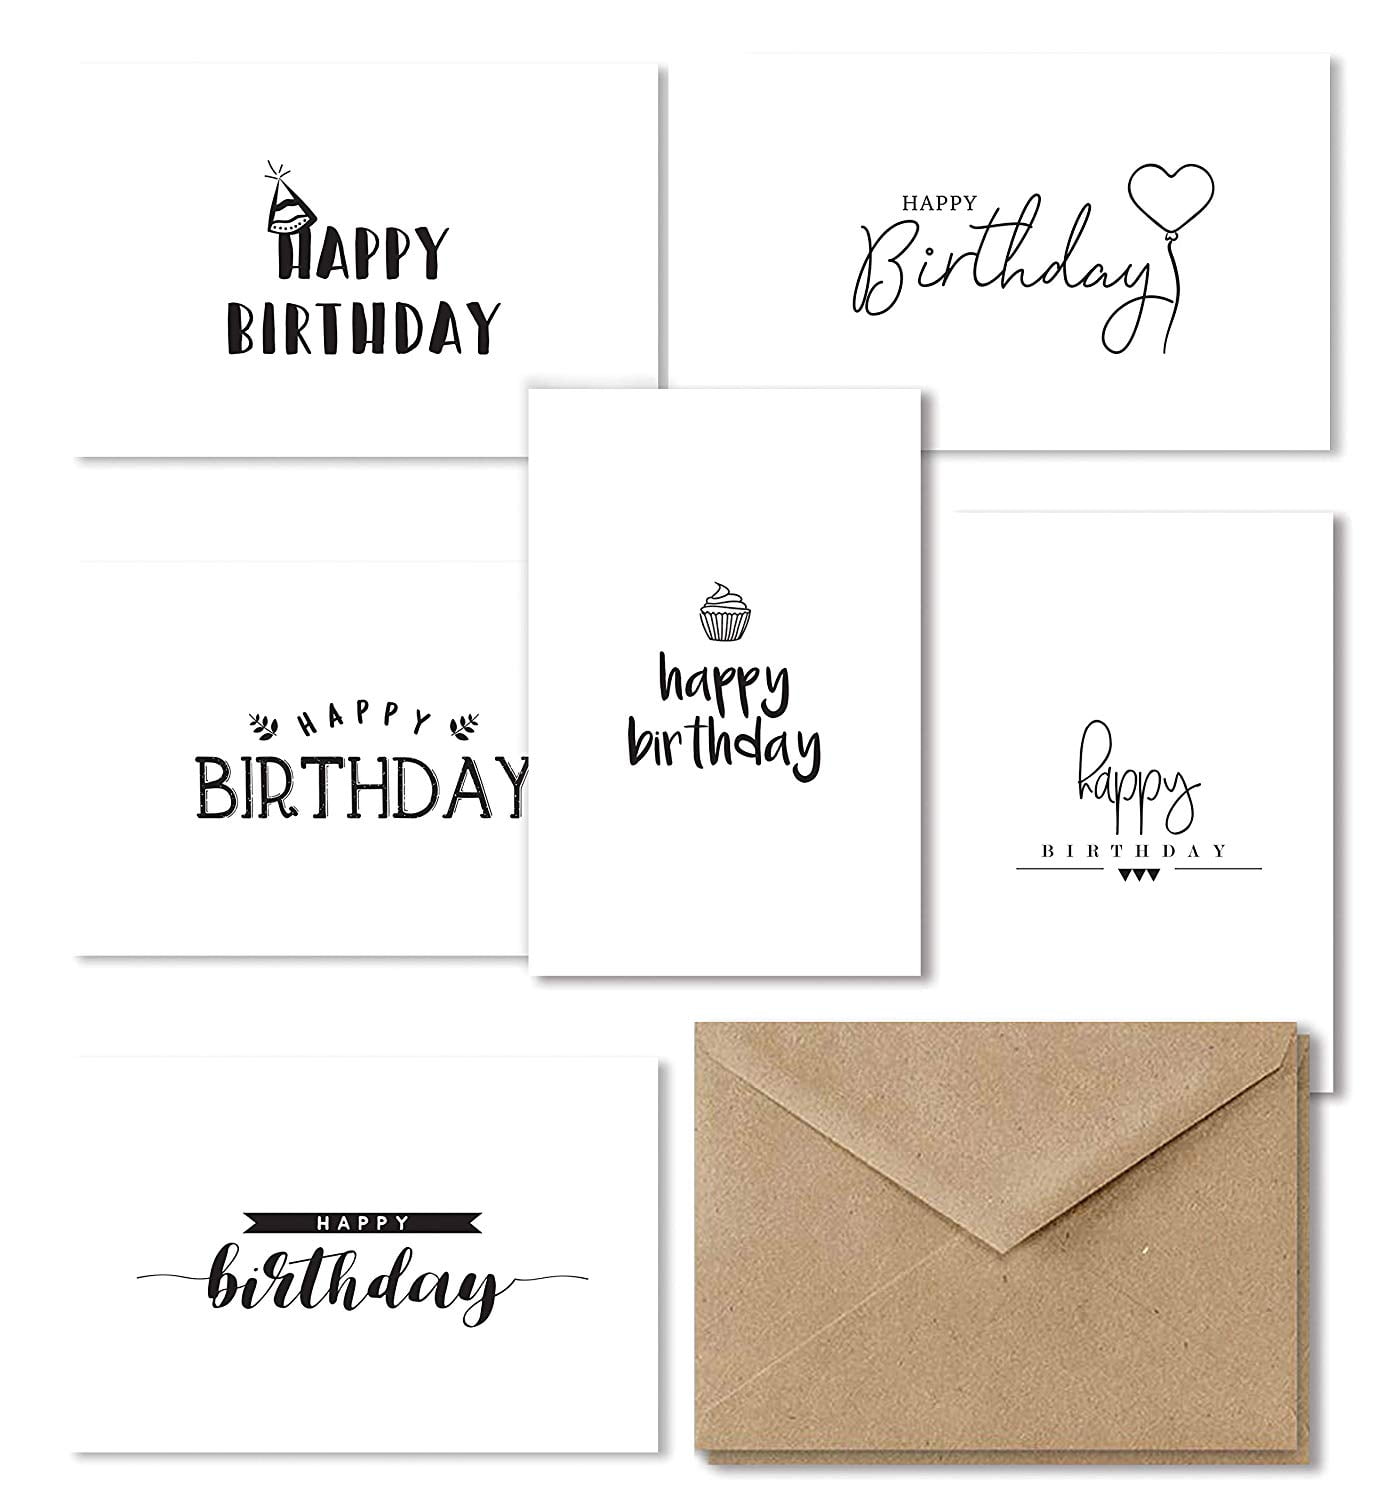 Details about   BIRTHDAY CARD AVACODO AVANTI GREETING CARD NEW WITH WHITE ENVELOPE MADE IN USA 